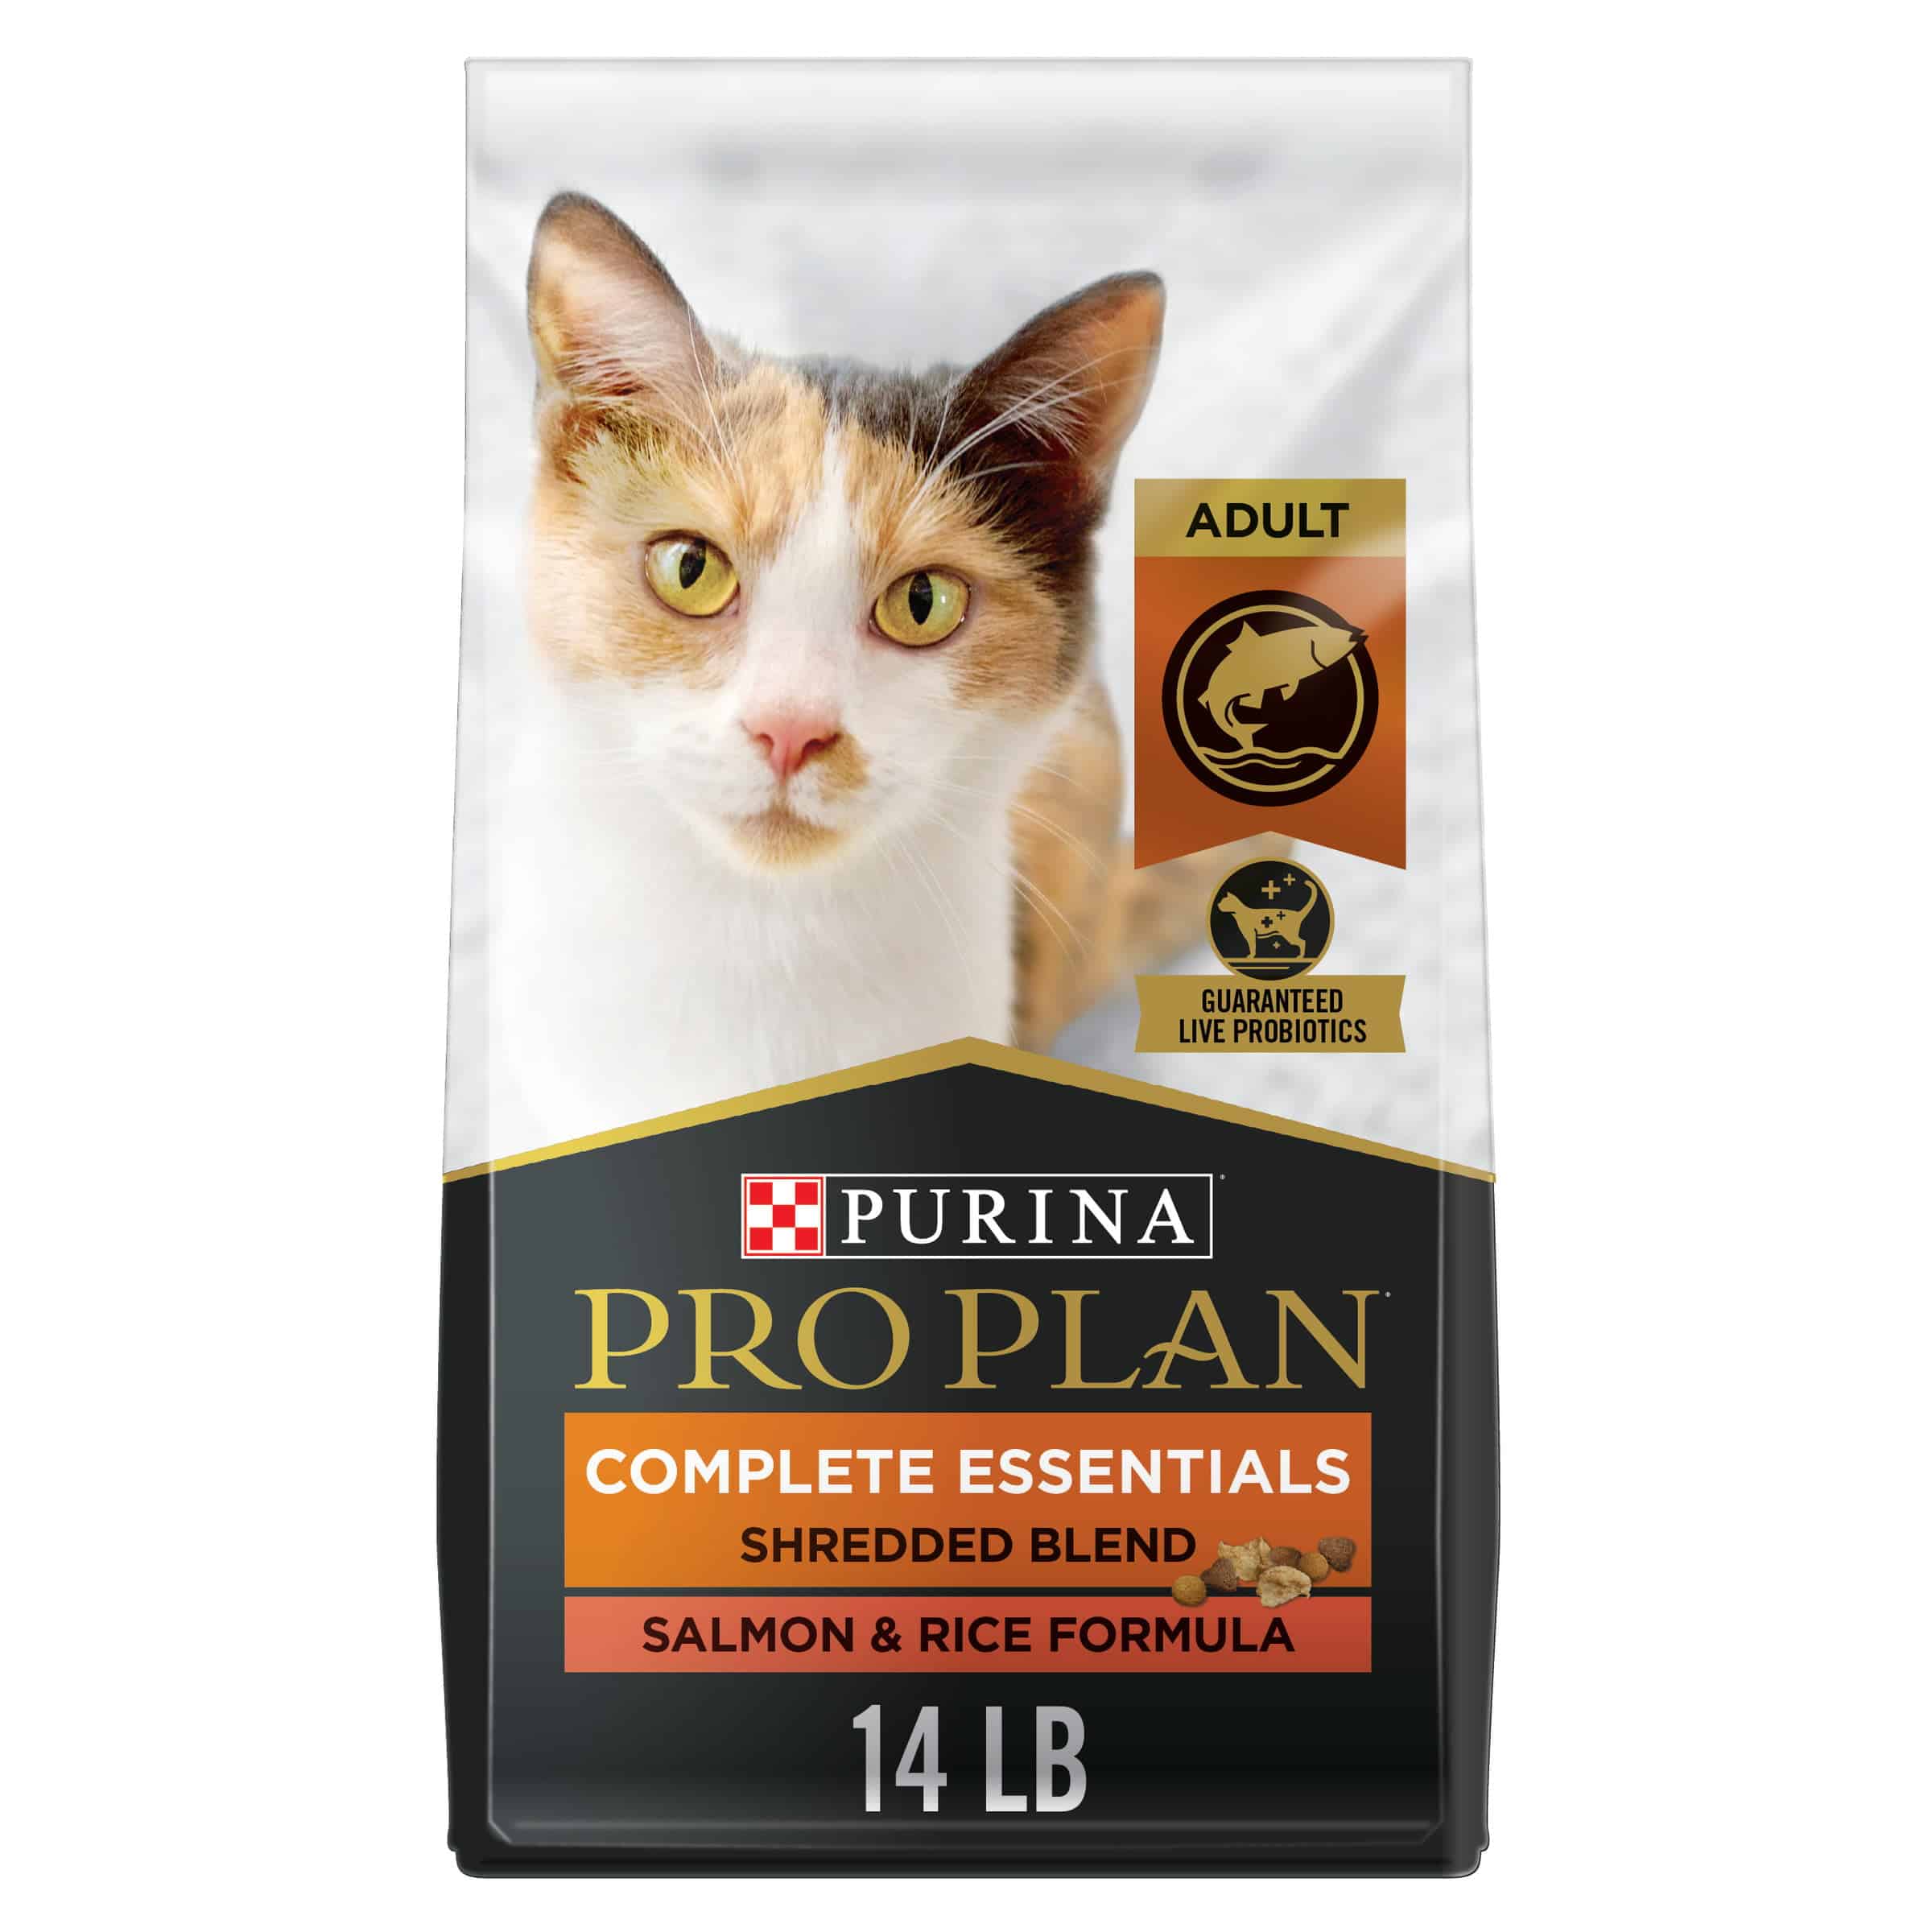 Purina Pro Plan High Protein Cat Food With Probiotics for Cats ...